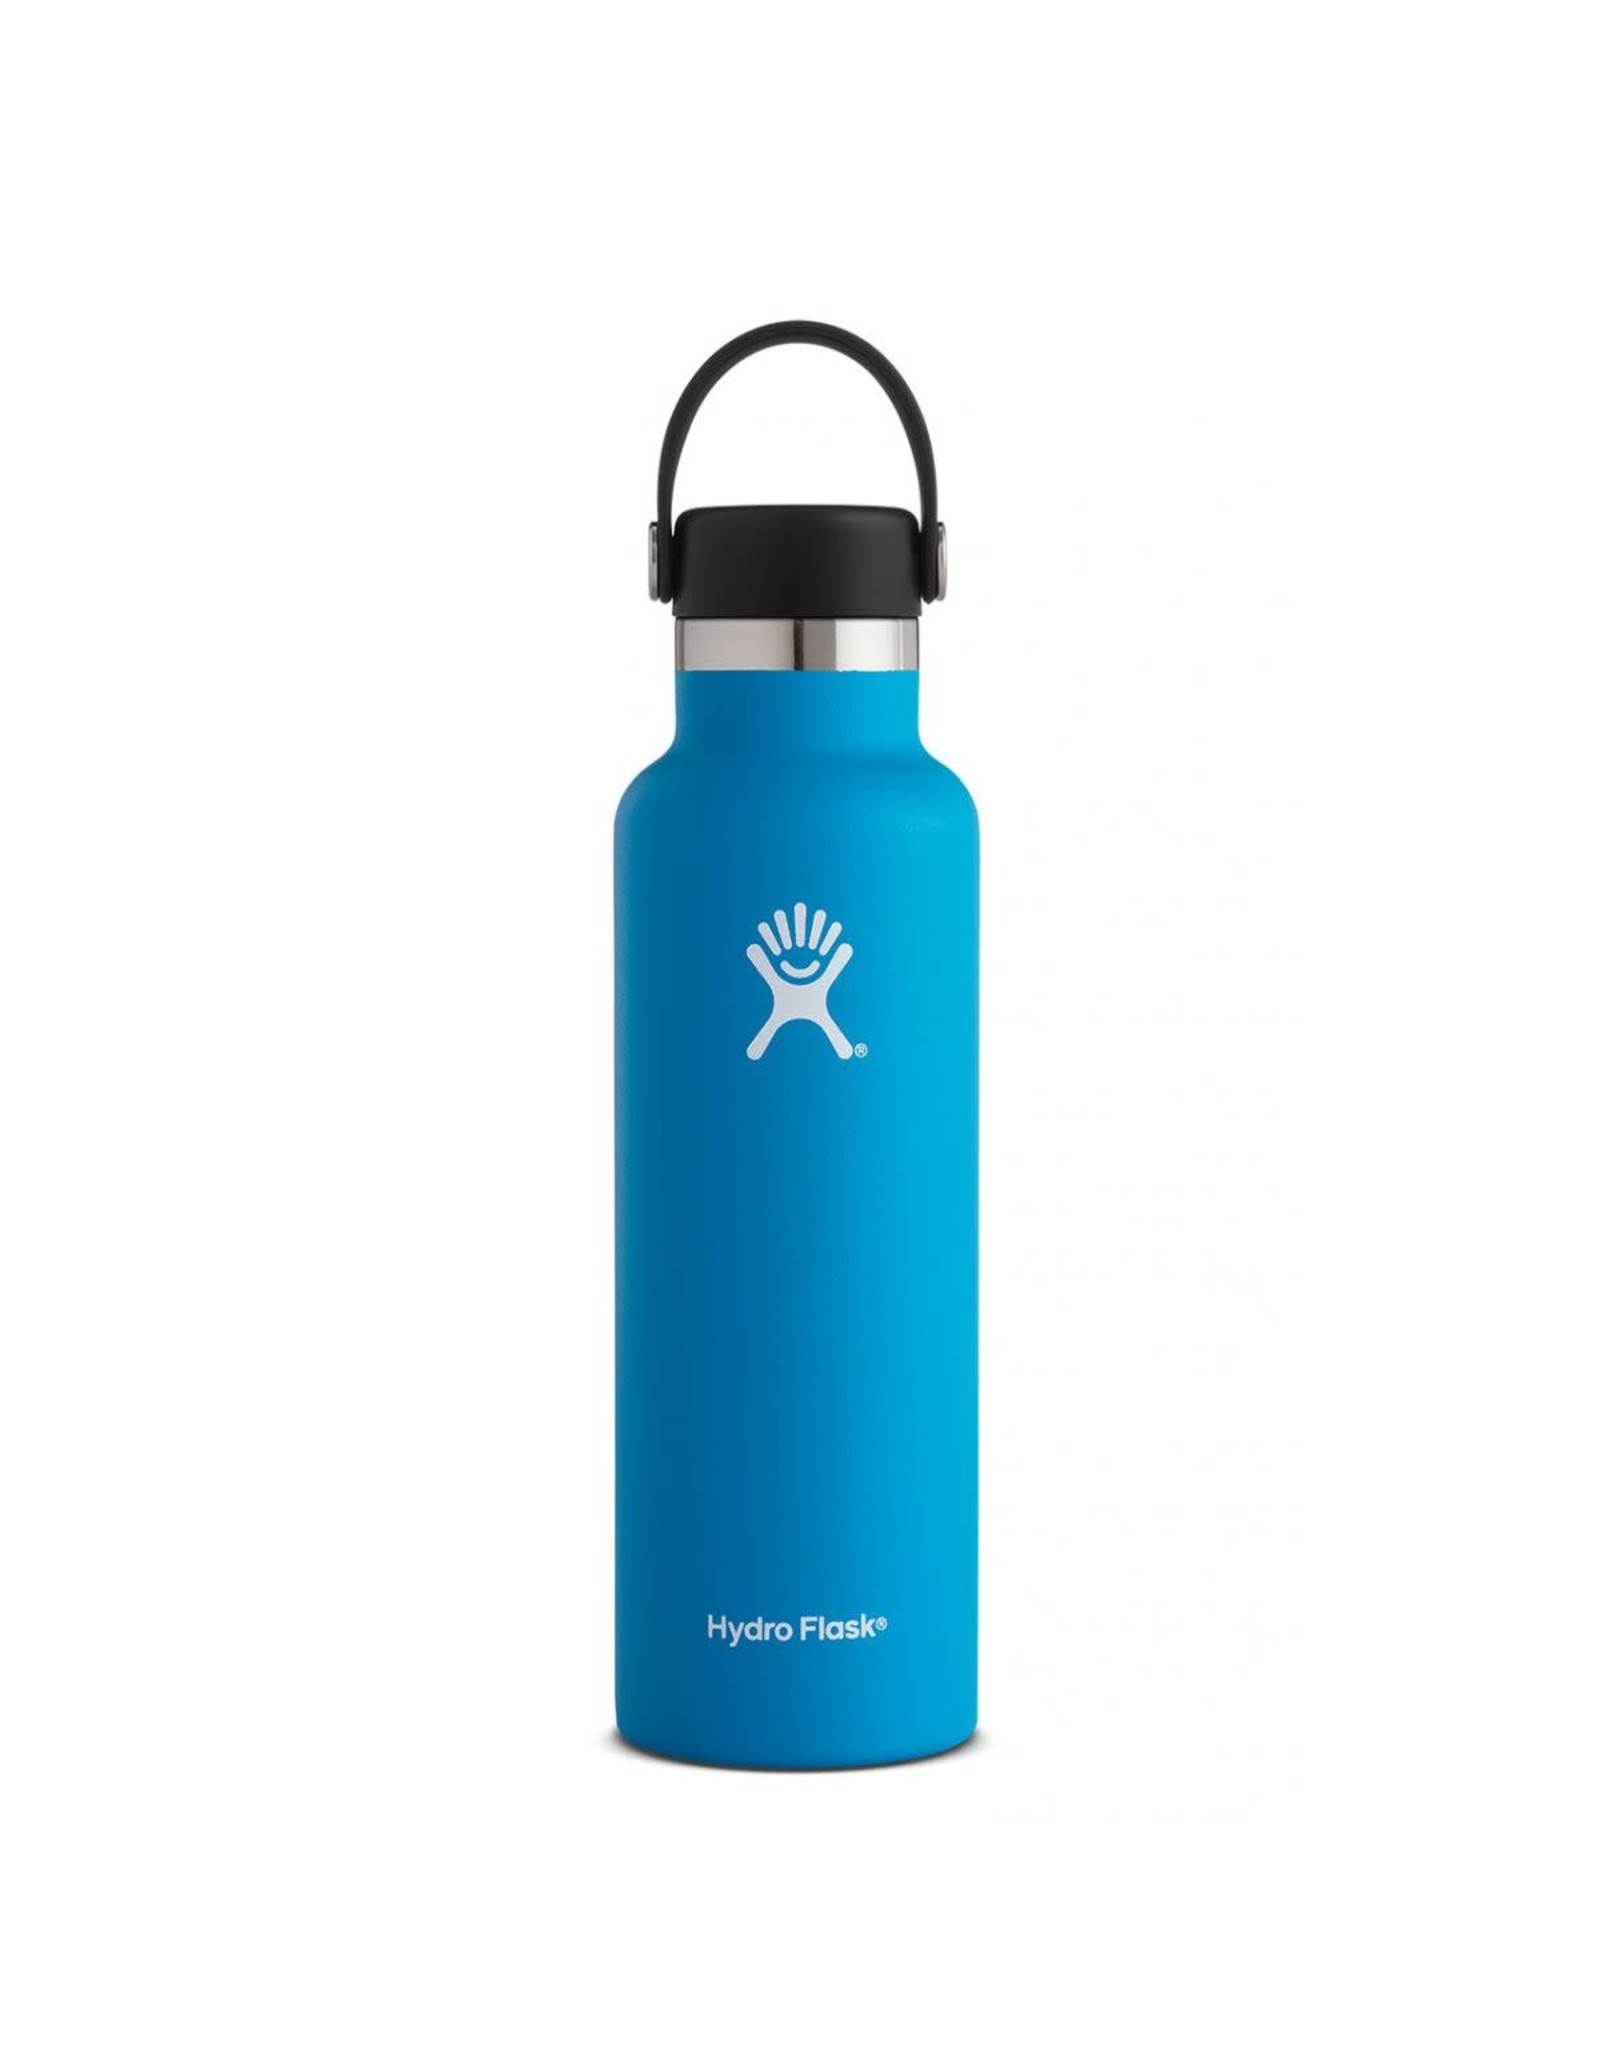 Hydro Flask Hydro Flask 21oz Standard Mouth with Flex Cap Pacific